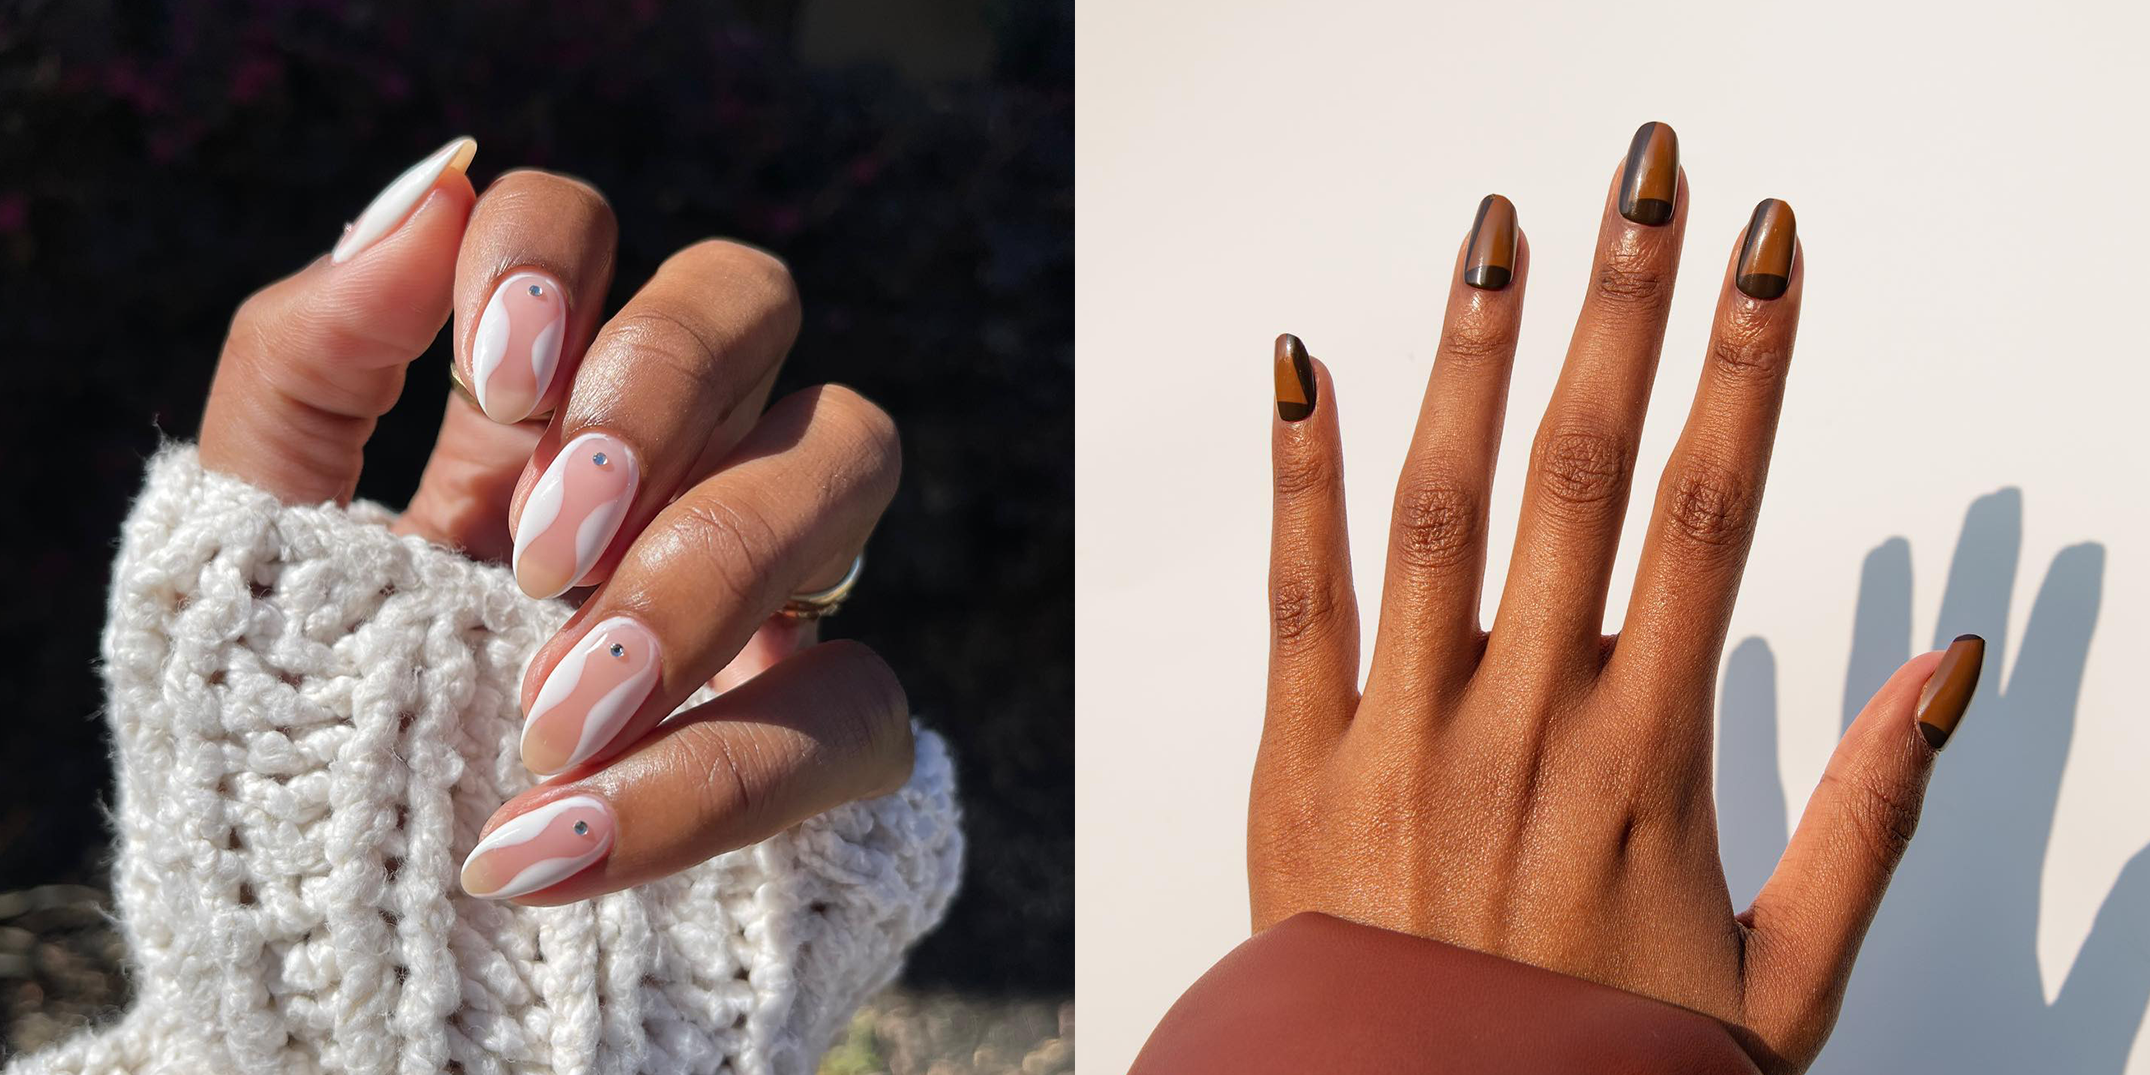 30 Best Natural Looking Nail Designs and Ideas to Try for 2023